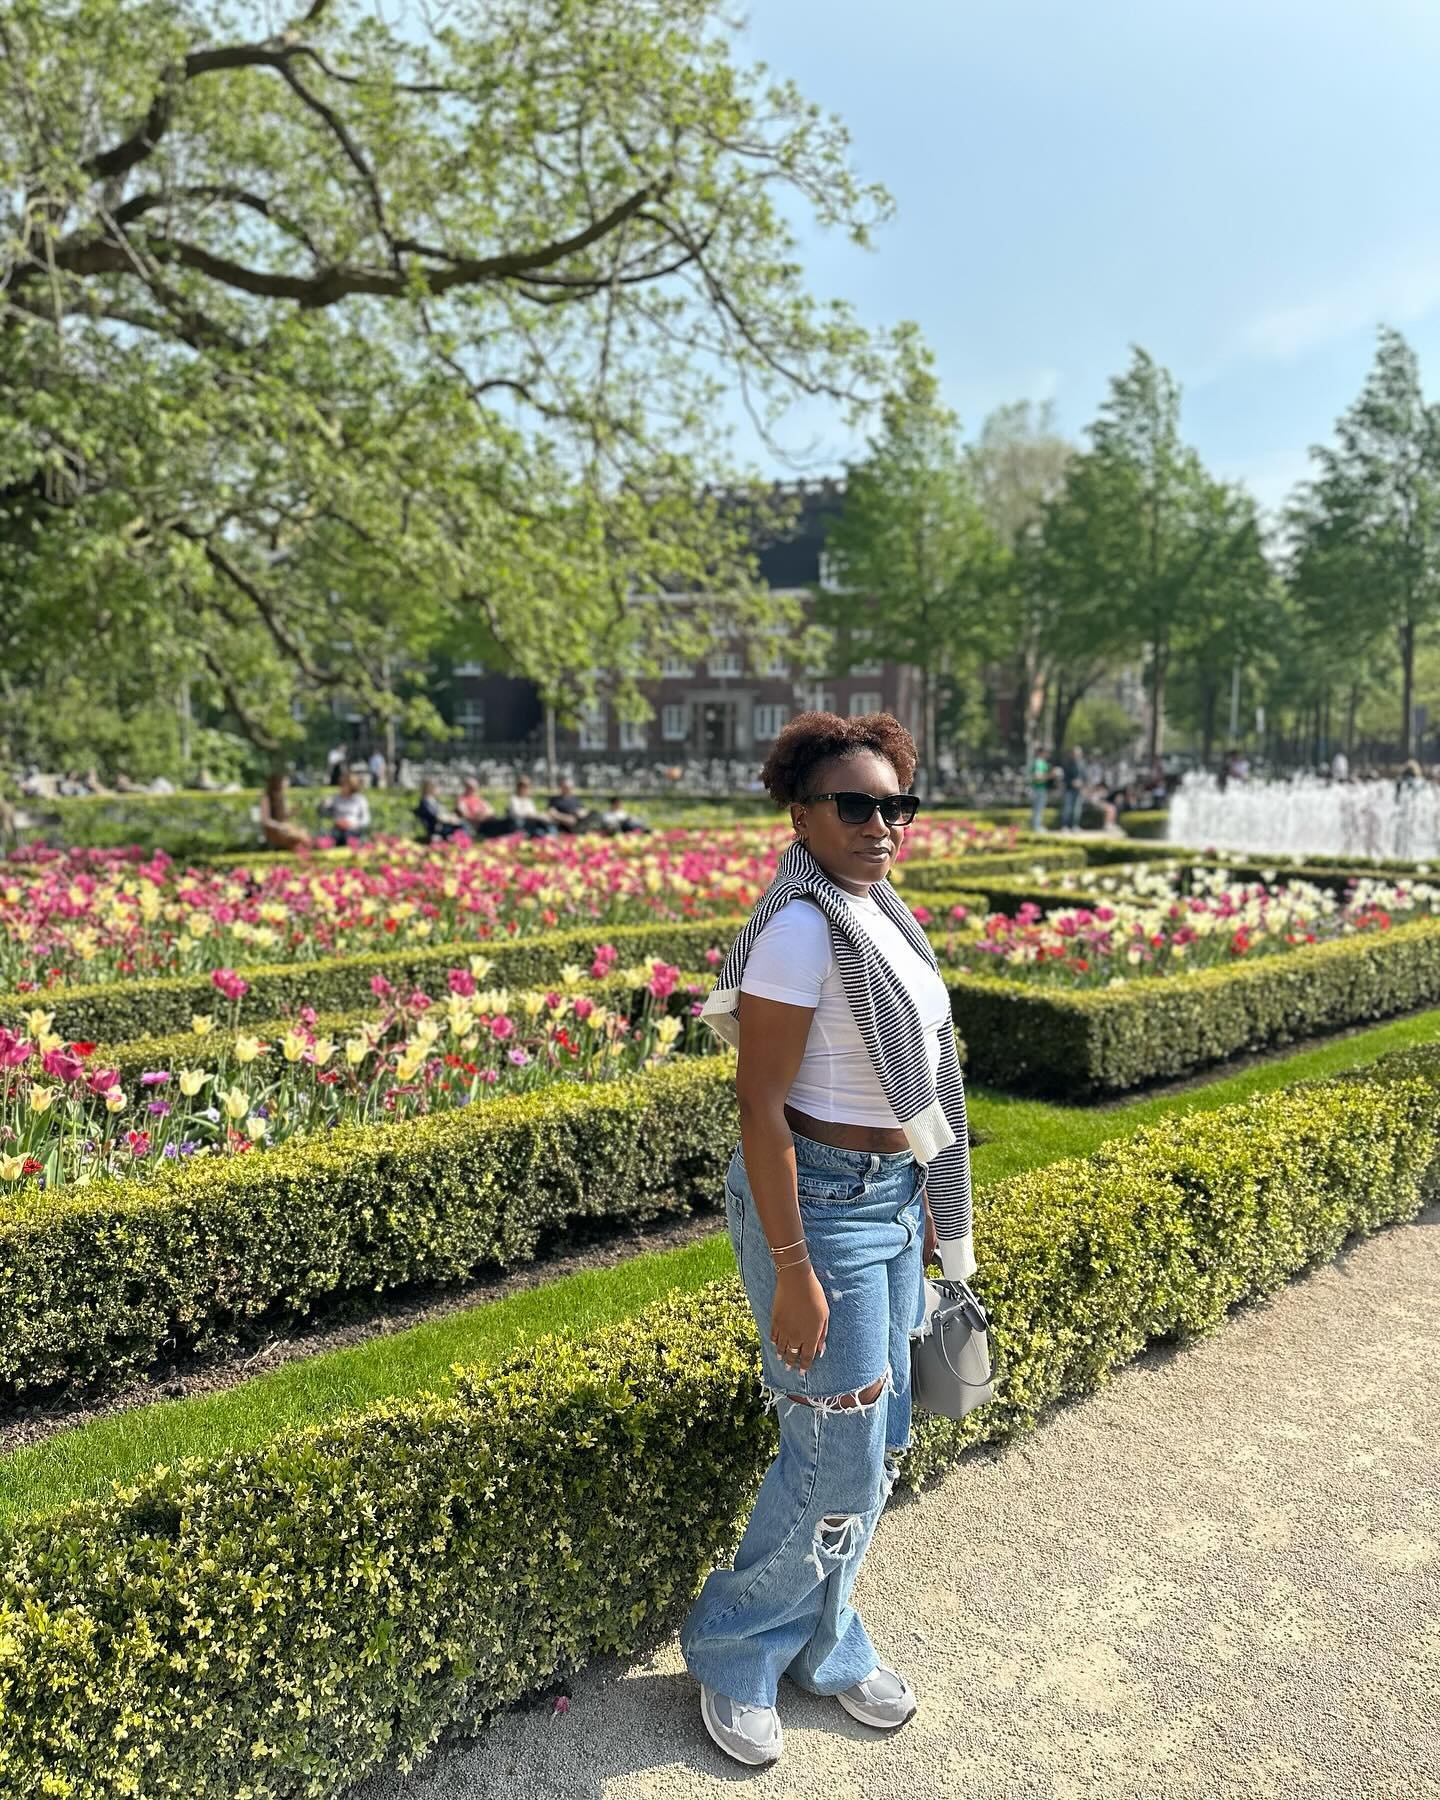 From Amsterdam with Love ❤️🚴🏾&zwj;♀️ | this trip was a long time in the making &amp; I&rsquo;m so happy how smoothly it worked out 🙌🏾 | 𝘄𝗵𝗲𝗻 𝘄𝗮𝘀 𝘆𝗼𝘂𝗿 𝗹𝗮𝘀𝘁 𝘁𝗿𝗶𝗽? 𝗗𝗼 𝘆𝗼𝘂 𝗵𝗮𝘃𝗲 𝗮𝗻𝘆 𝘂𝗽𝗰𝗼𝗺𝗶𝗻𝗴 𝘁𝗿𝗶𝗽𝘀?
&zwnj;
As